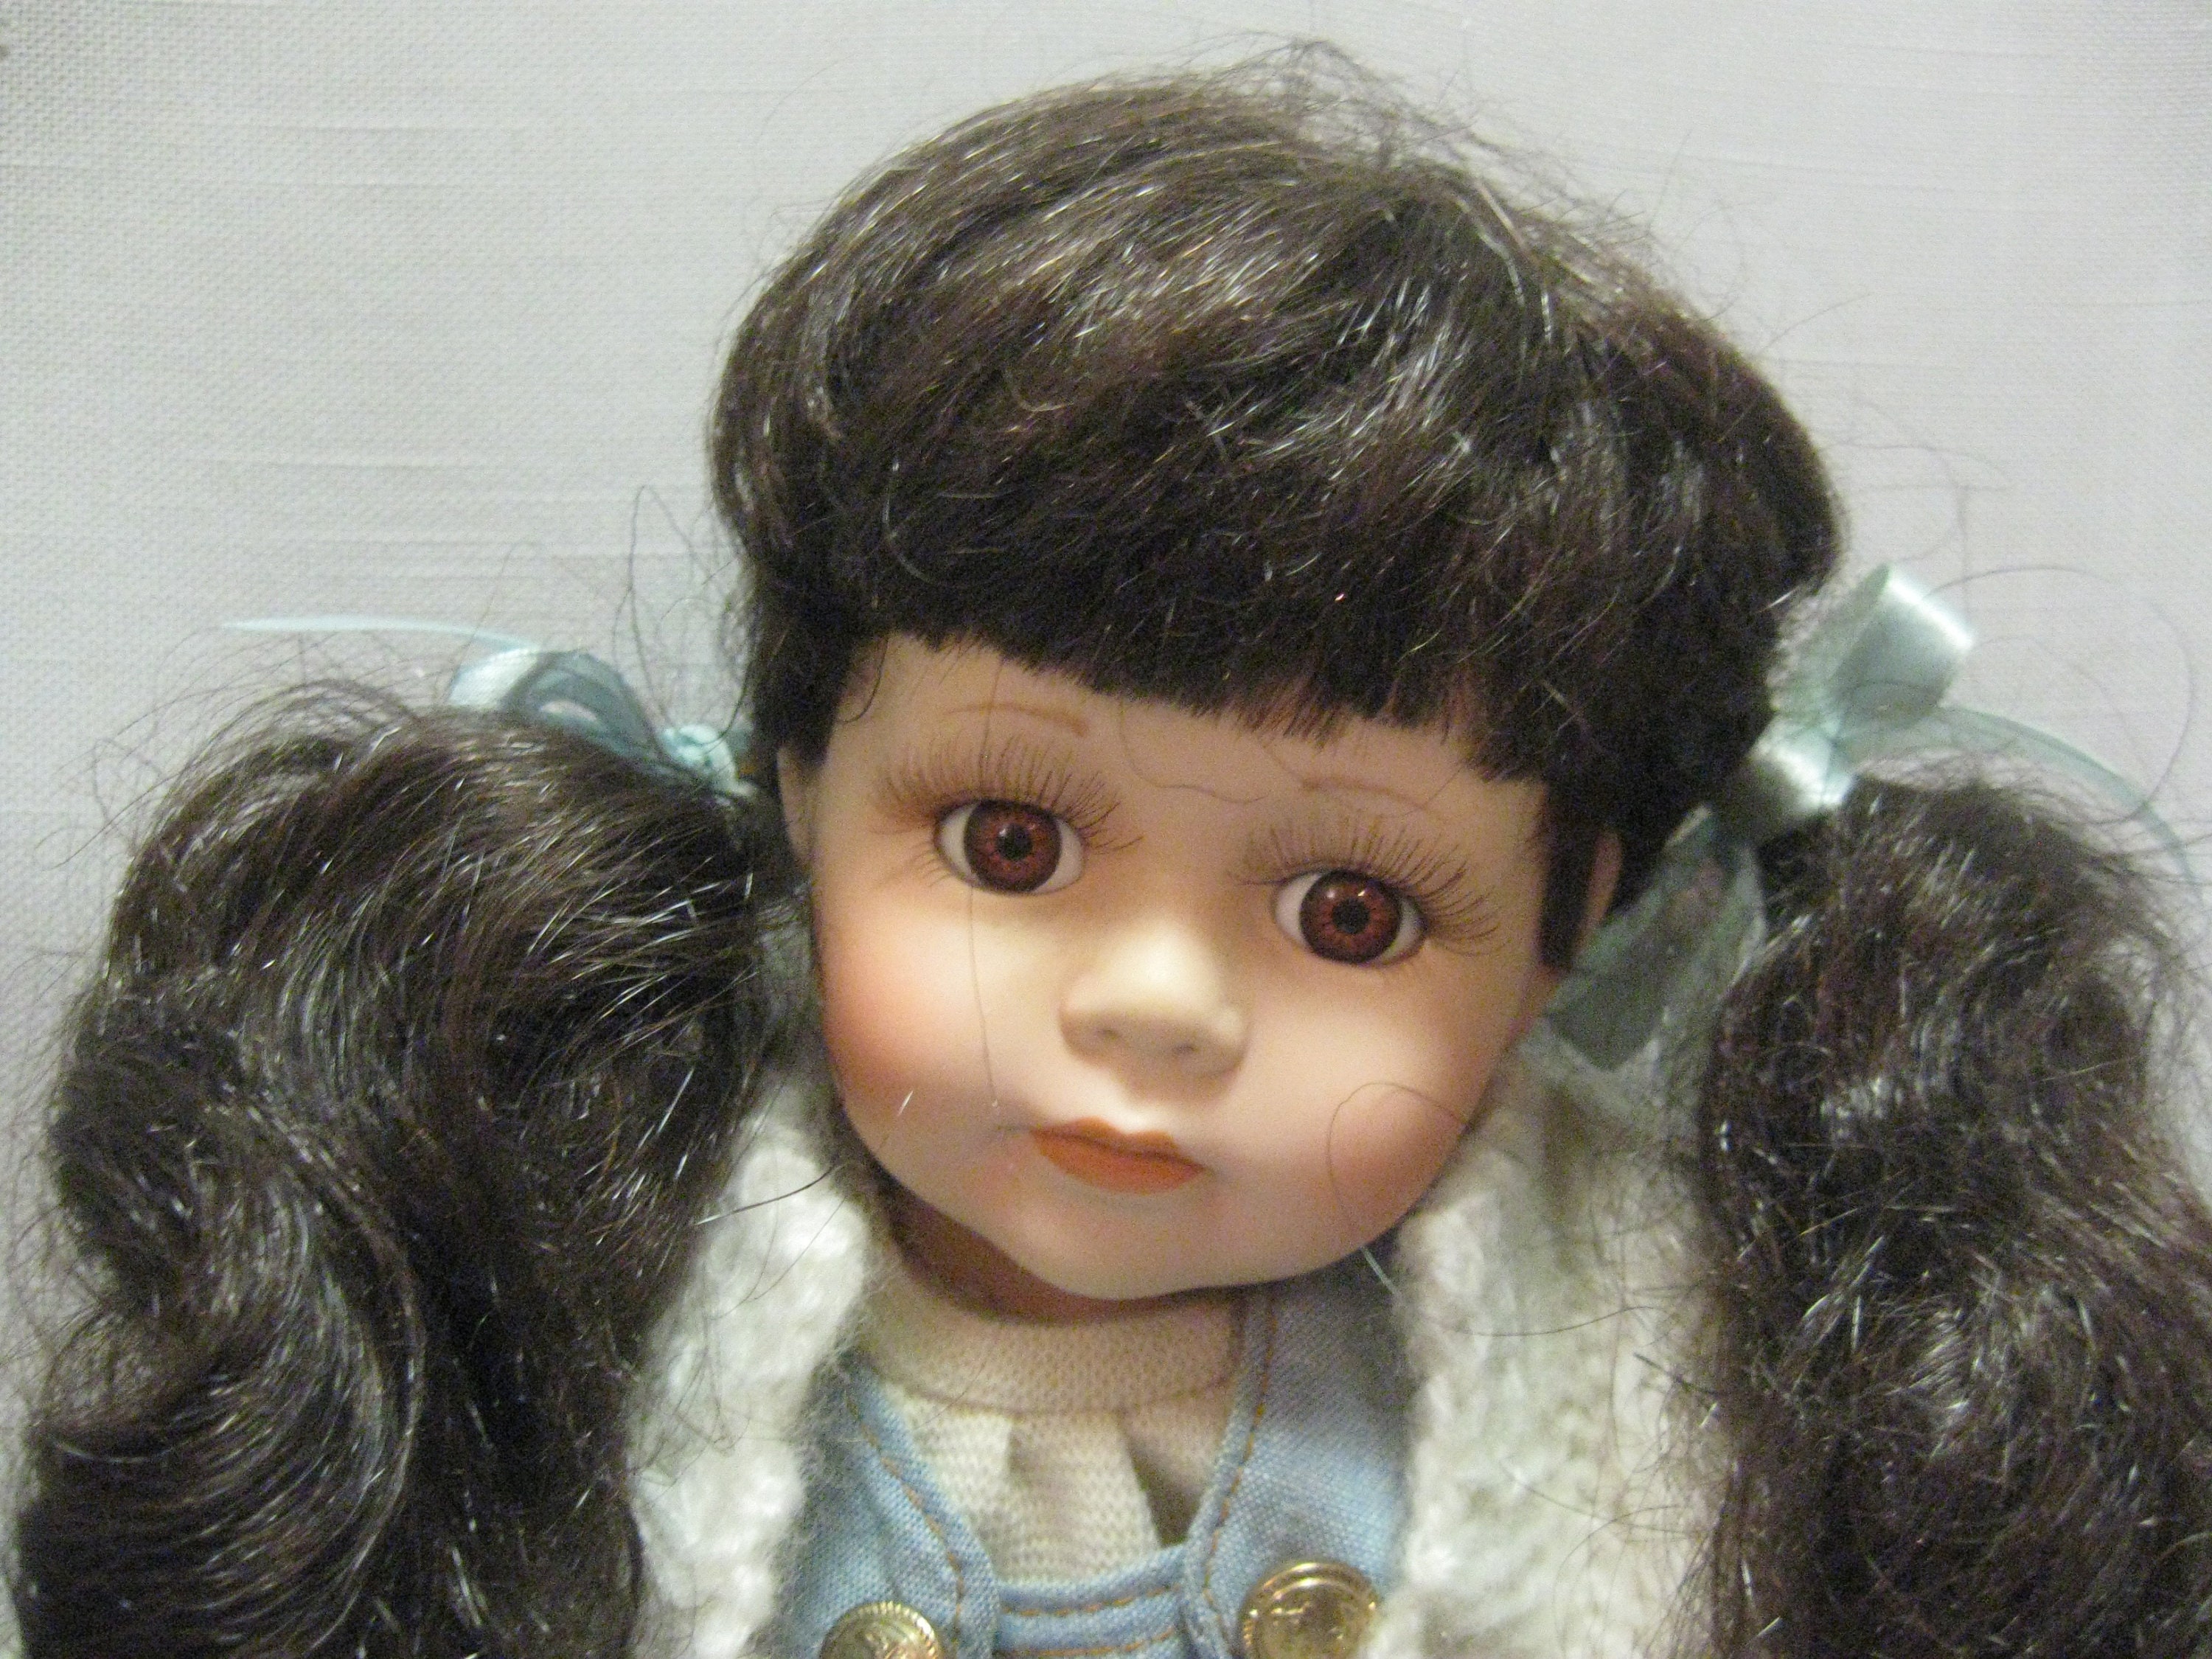 Porcelain Doll Brown Hair and Eyes Blue Overalls and Gold Tone